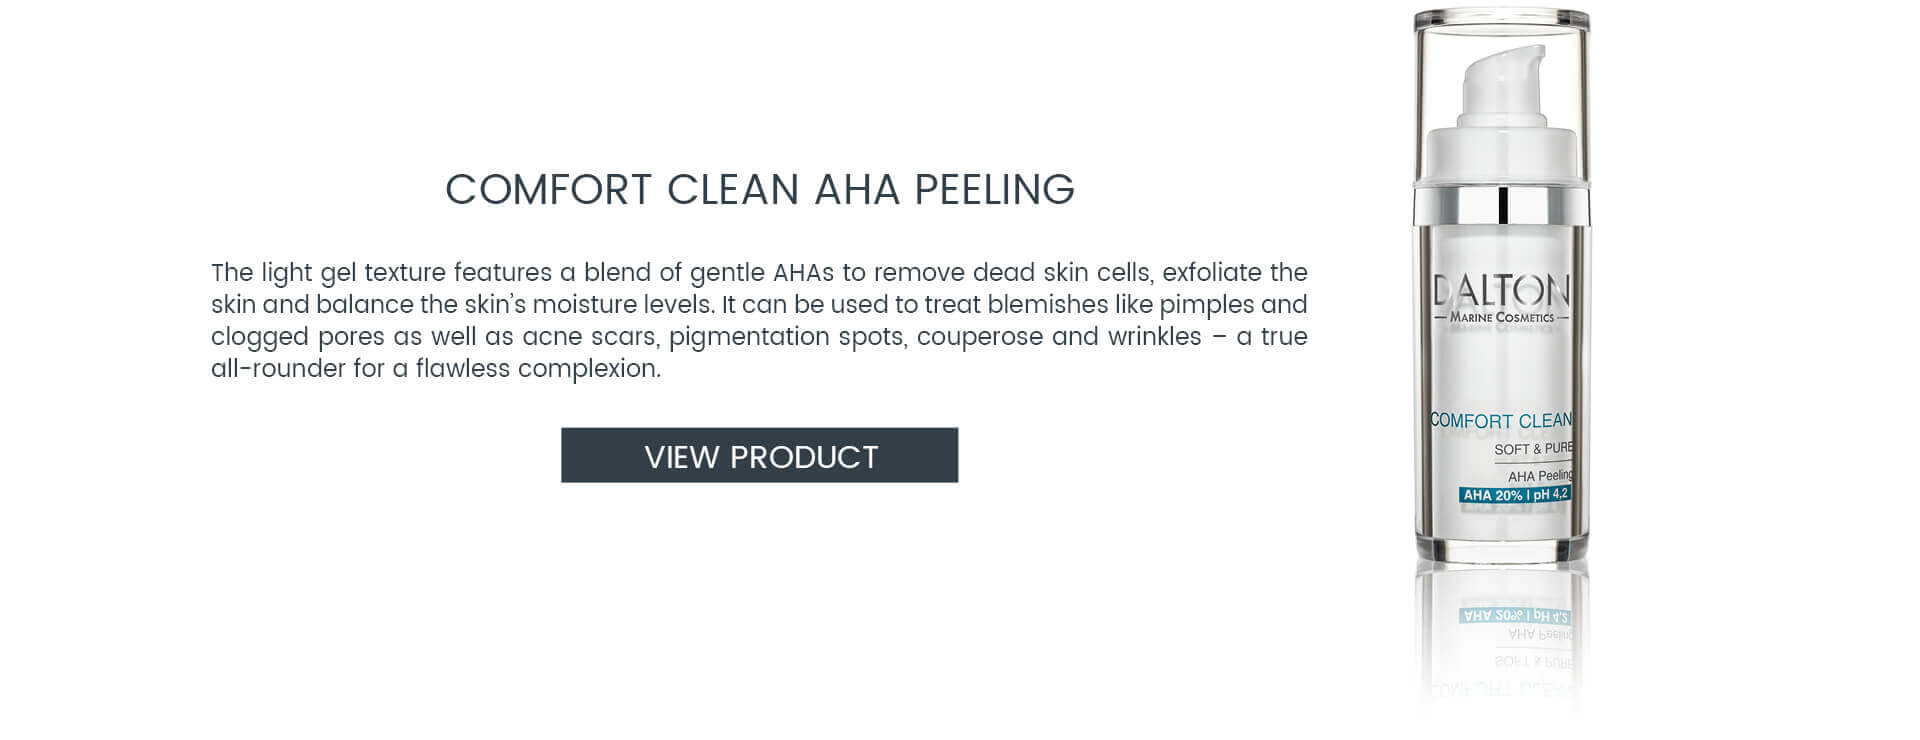 AHA Peeling to treat pimples and blemishes